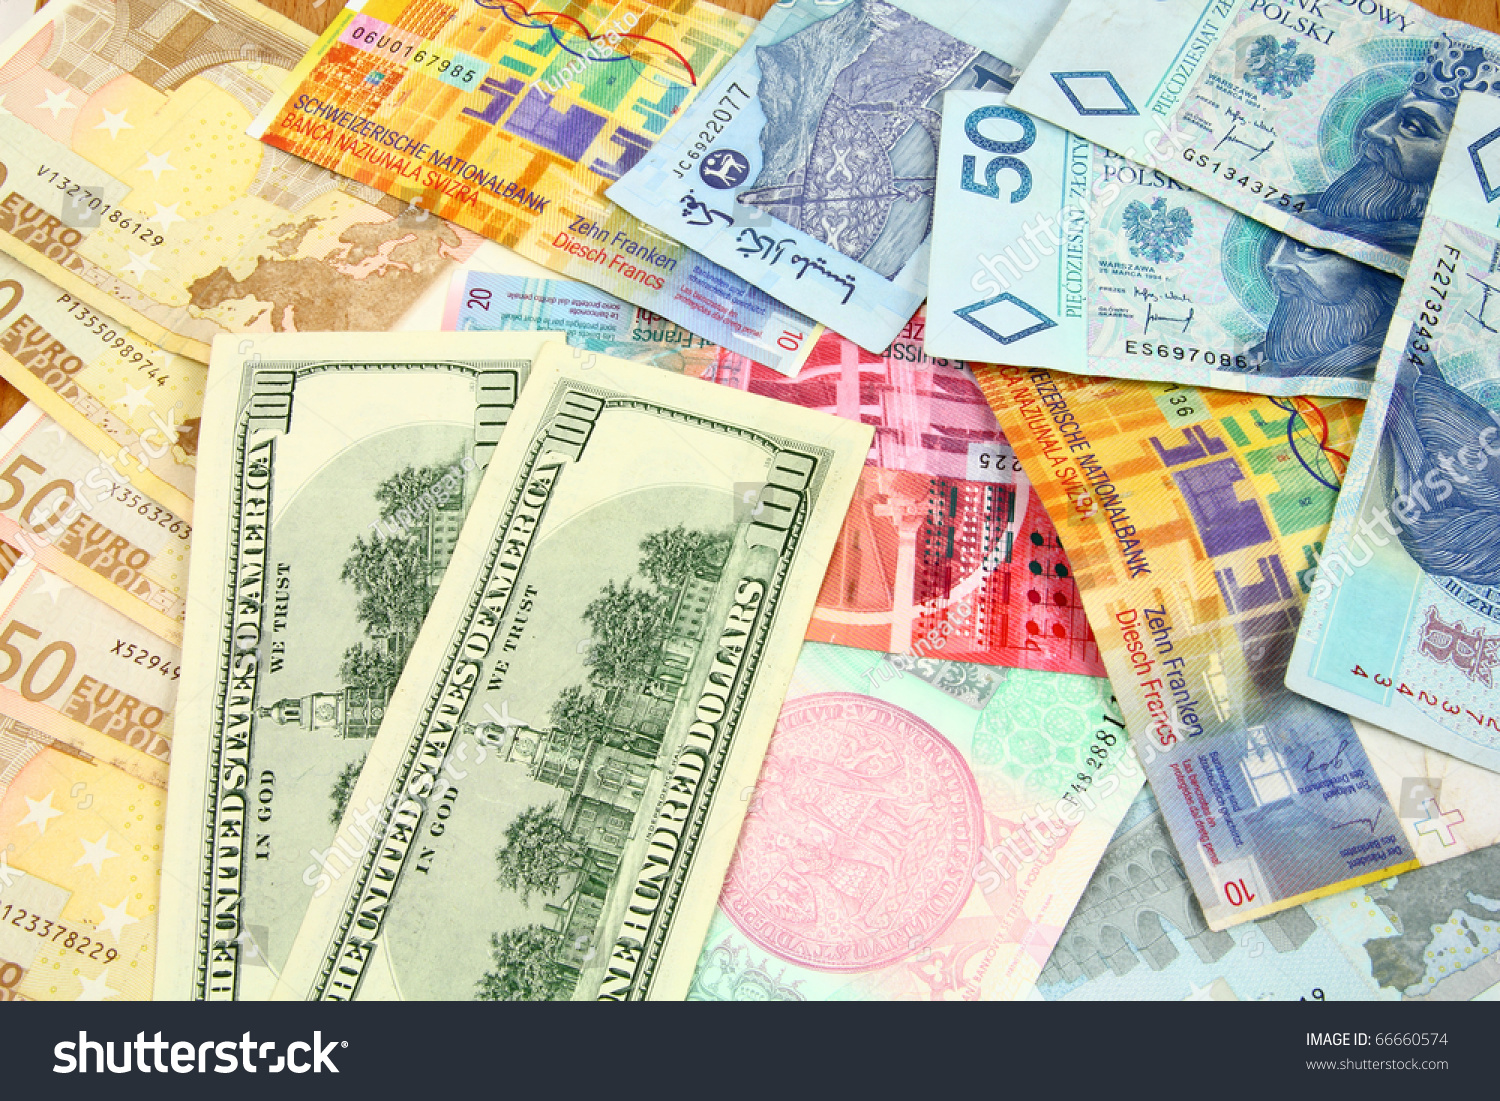 money and foreign exchange market in malaysia